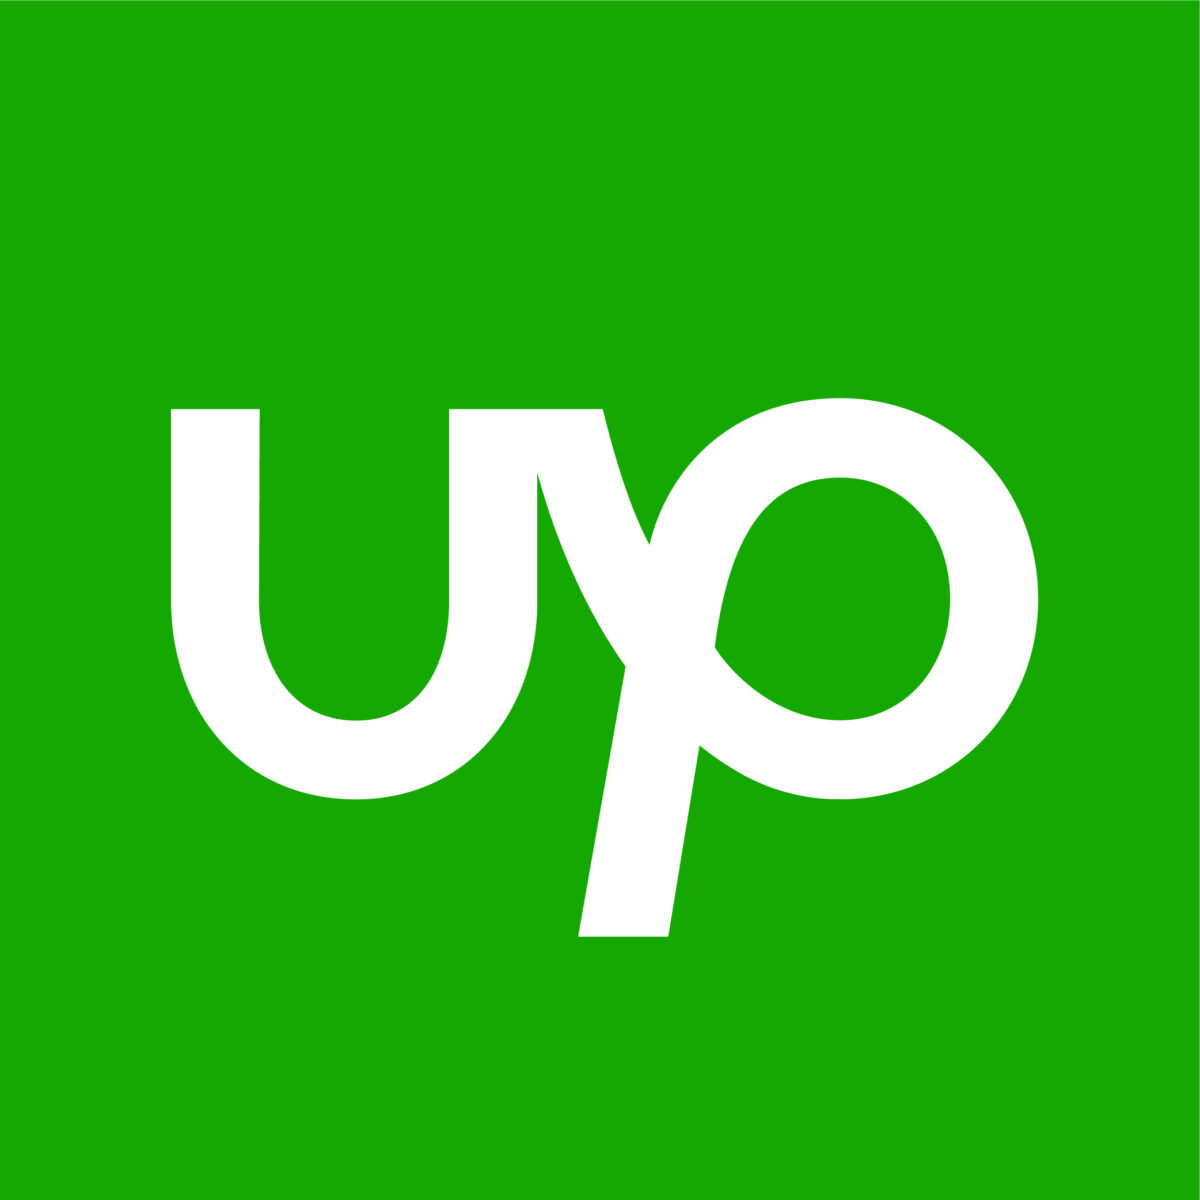 Upwork can help you make money by connecting you with people who need your skills.